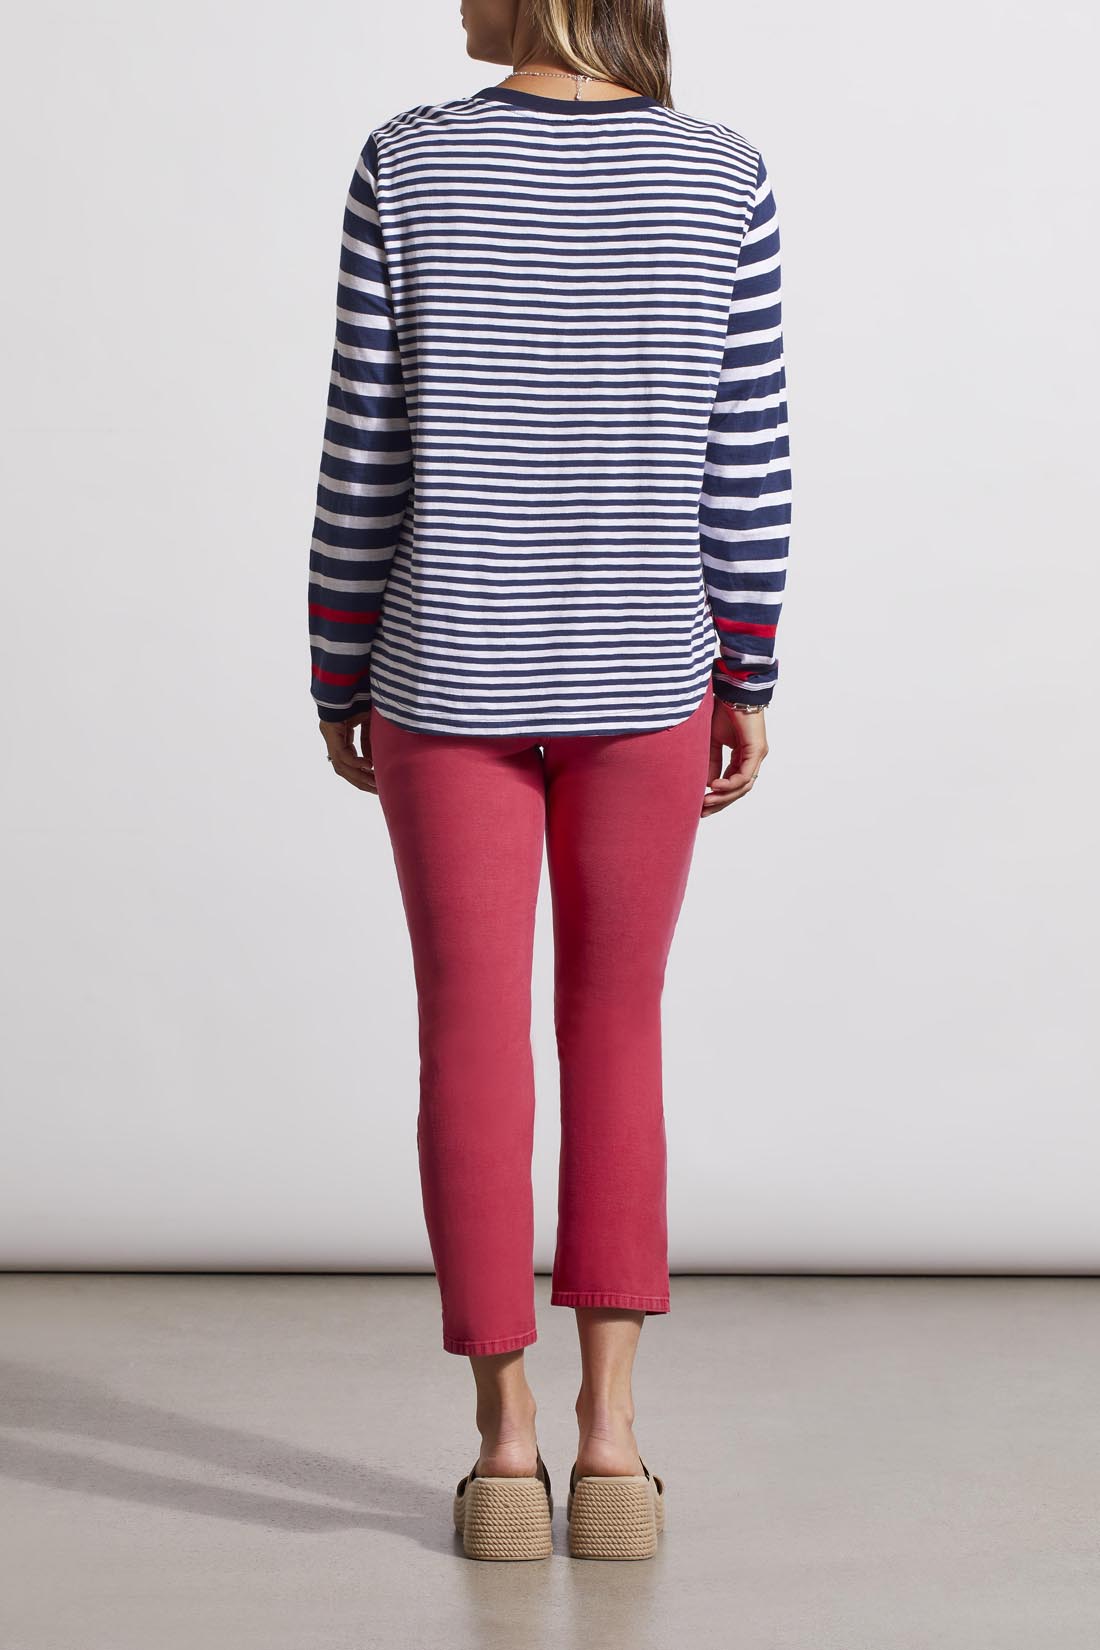 Crew Neck Nautical Striped Top by Tribal